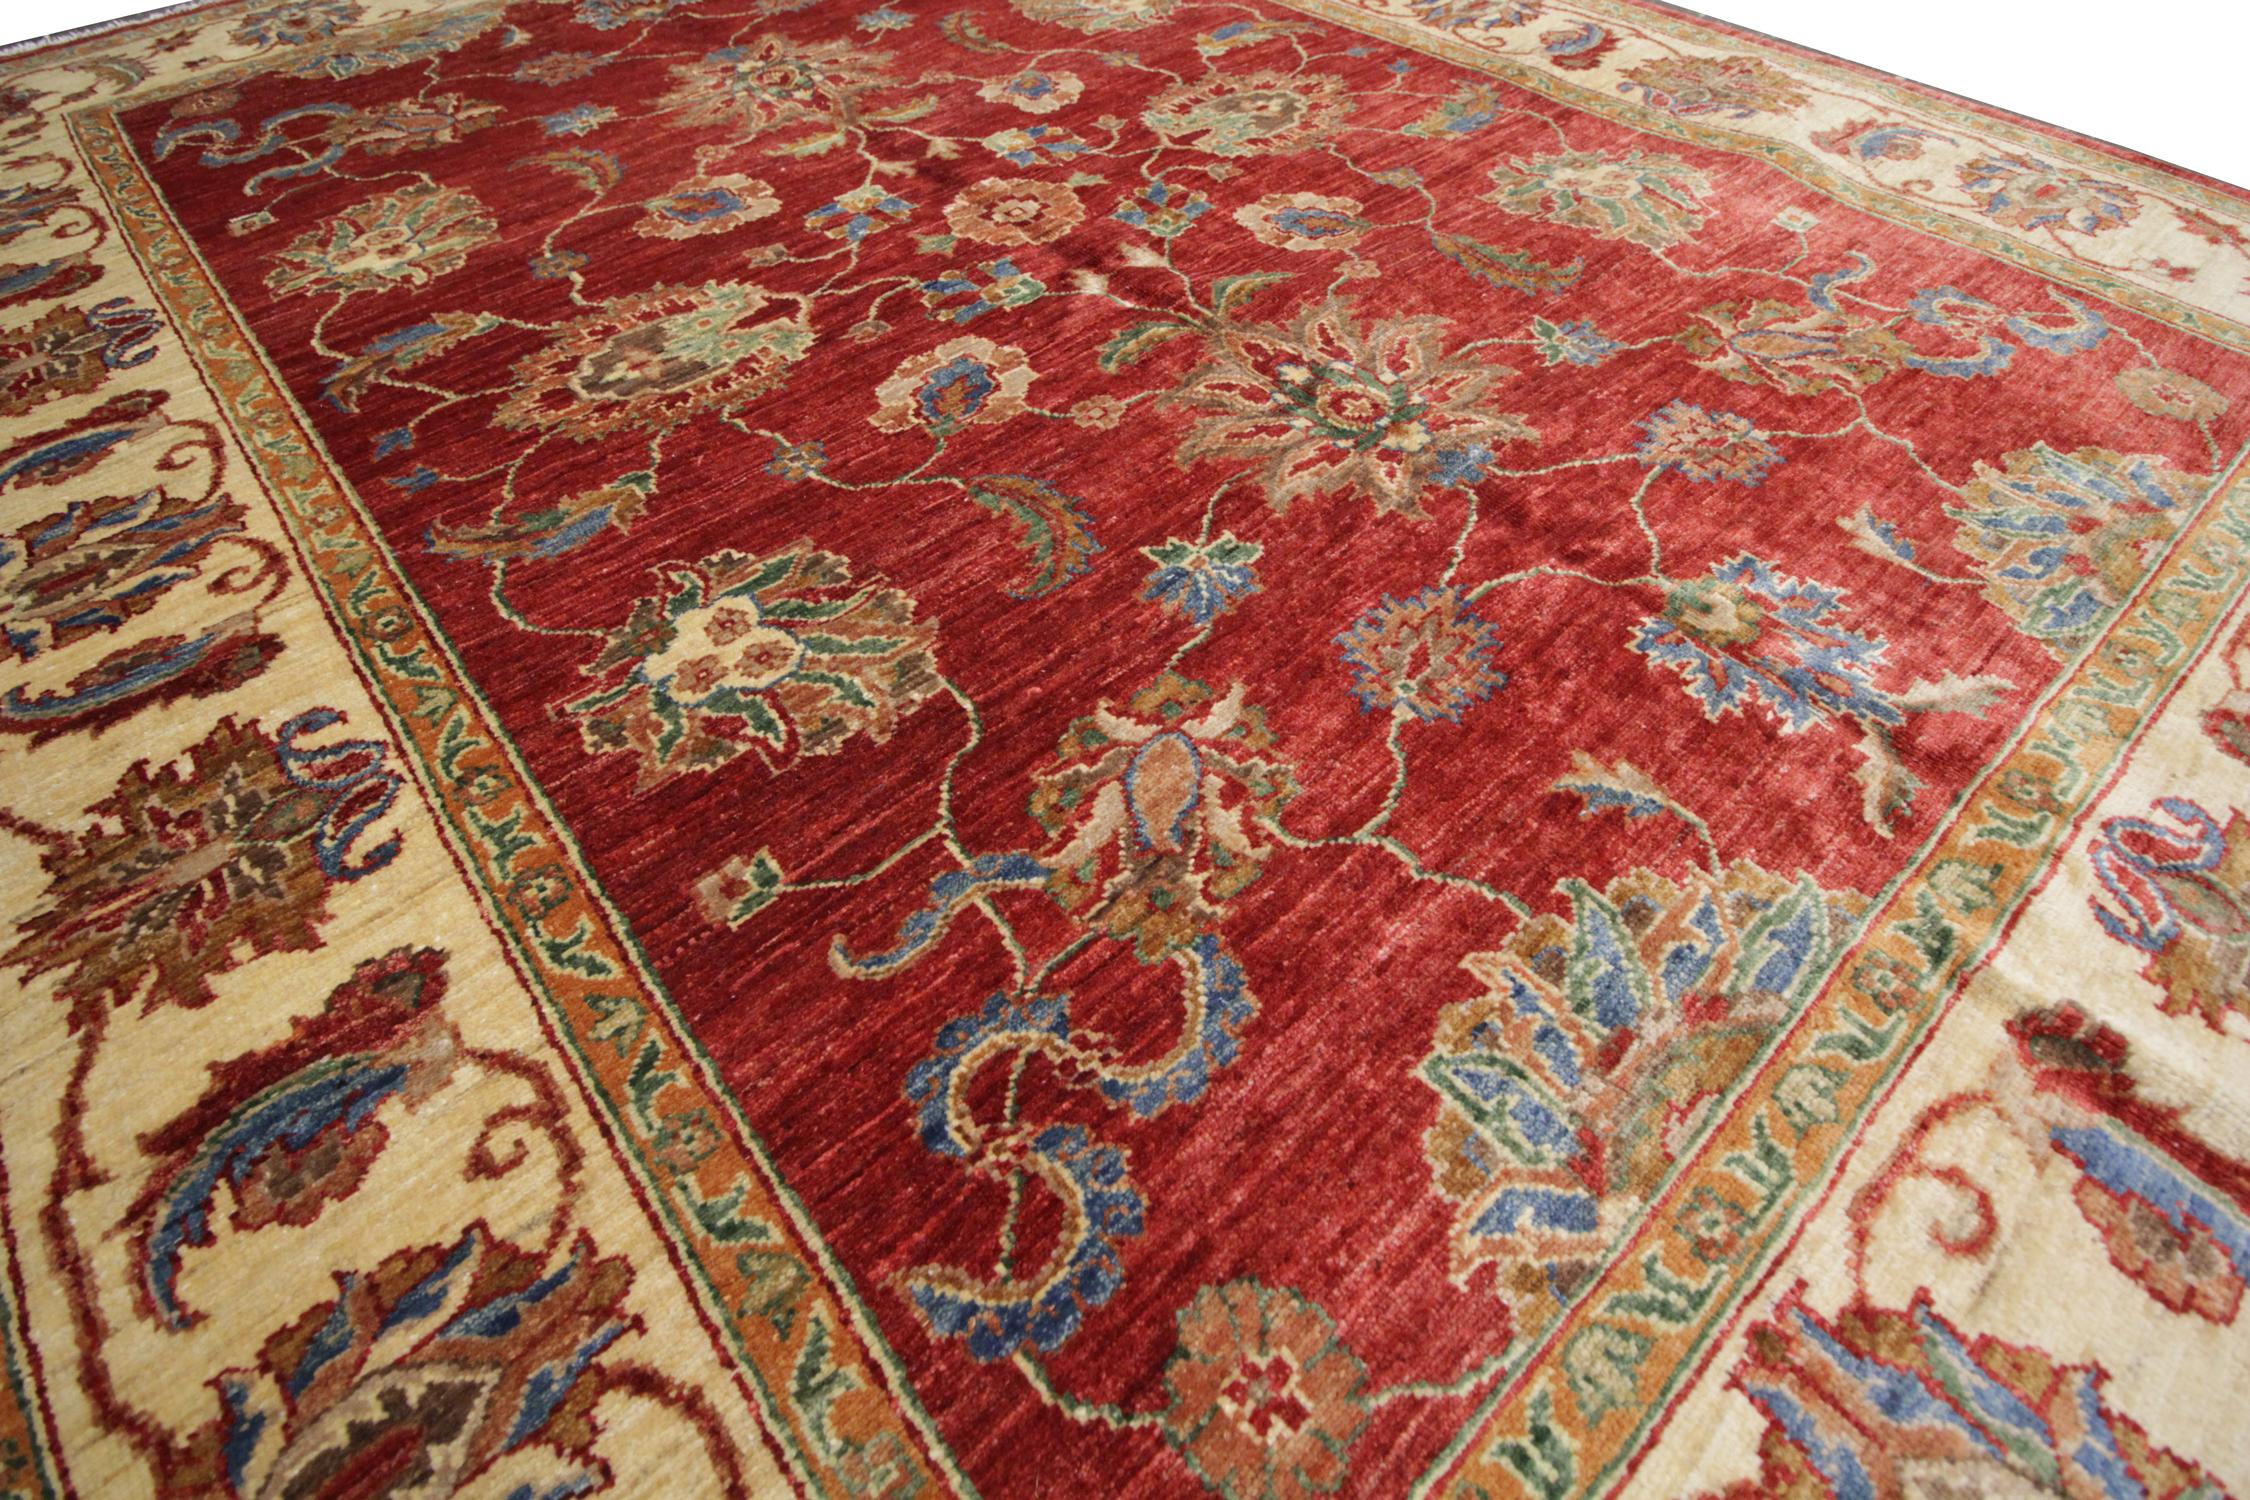 This traditional Zigler carpet had been handwoven and constructed with all-natural handspun and organic dyed wool. The subtle cream border contrasts with a deep red background which is centre stage to the stunning symmetrical, handwoven floral